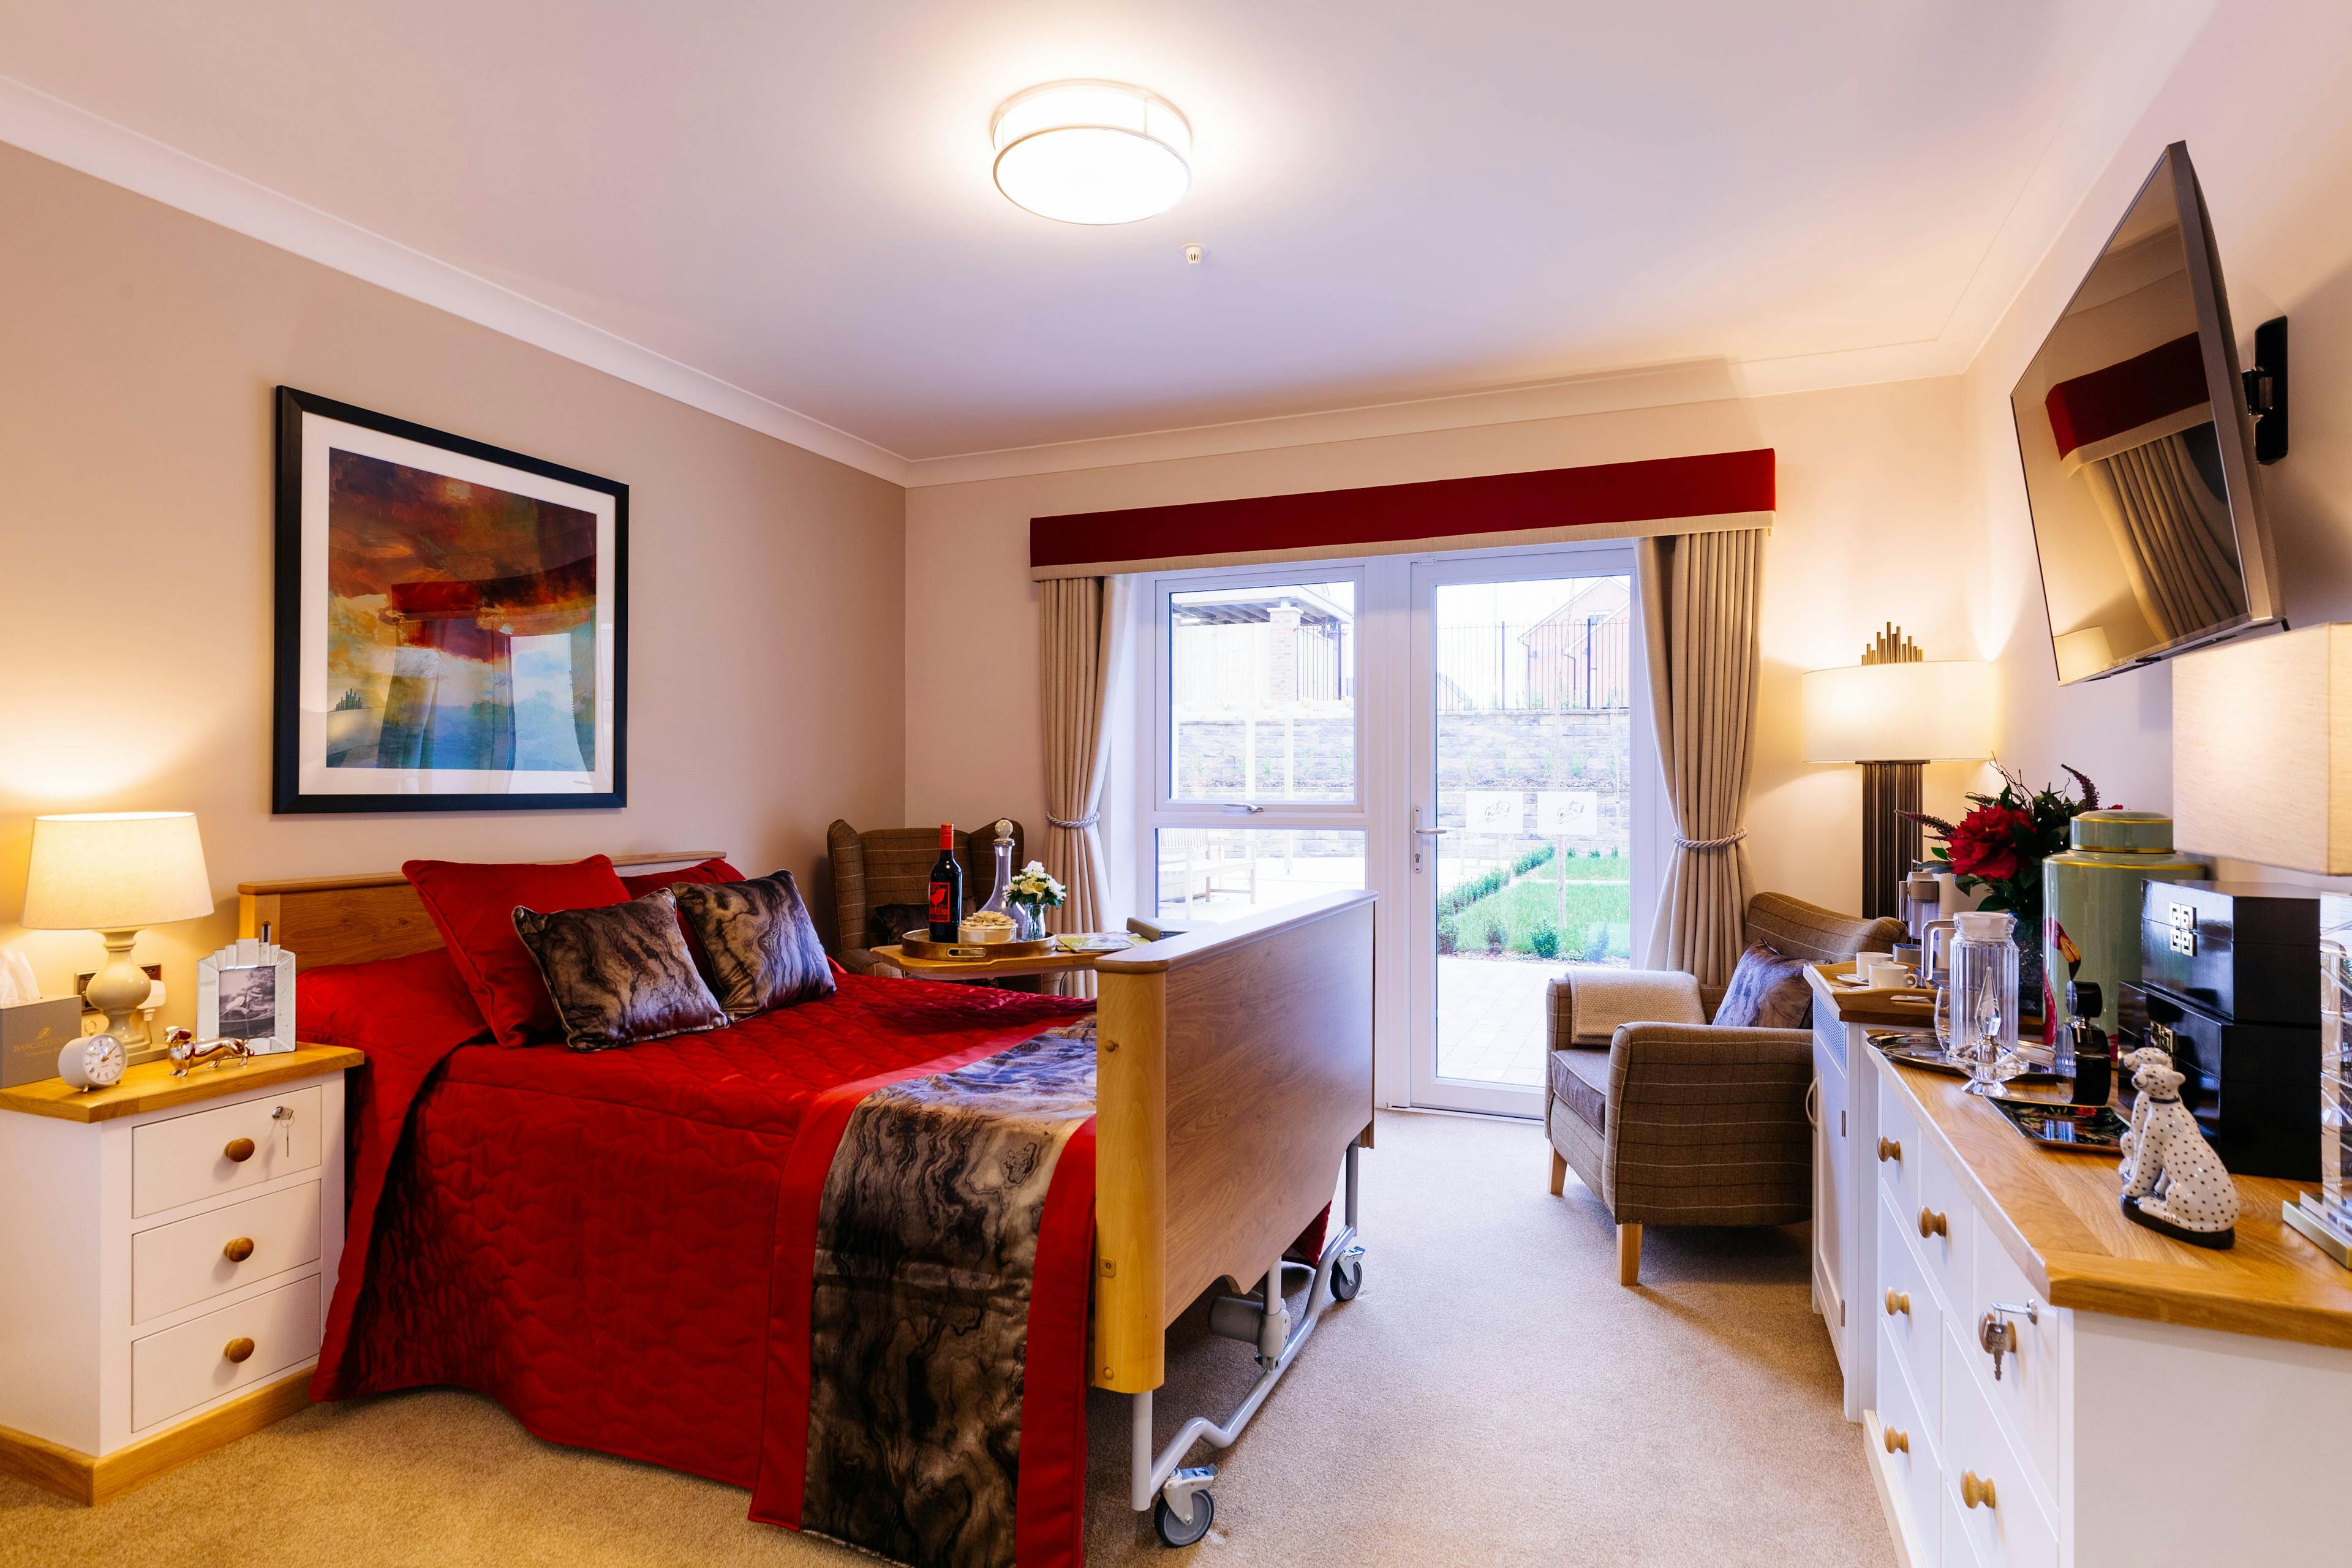 Bedroom of Upton Bay Care Home in Poole, Dorset